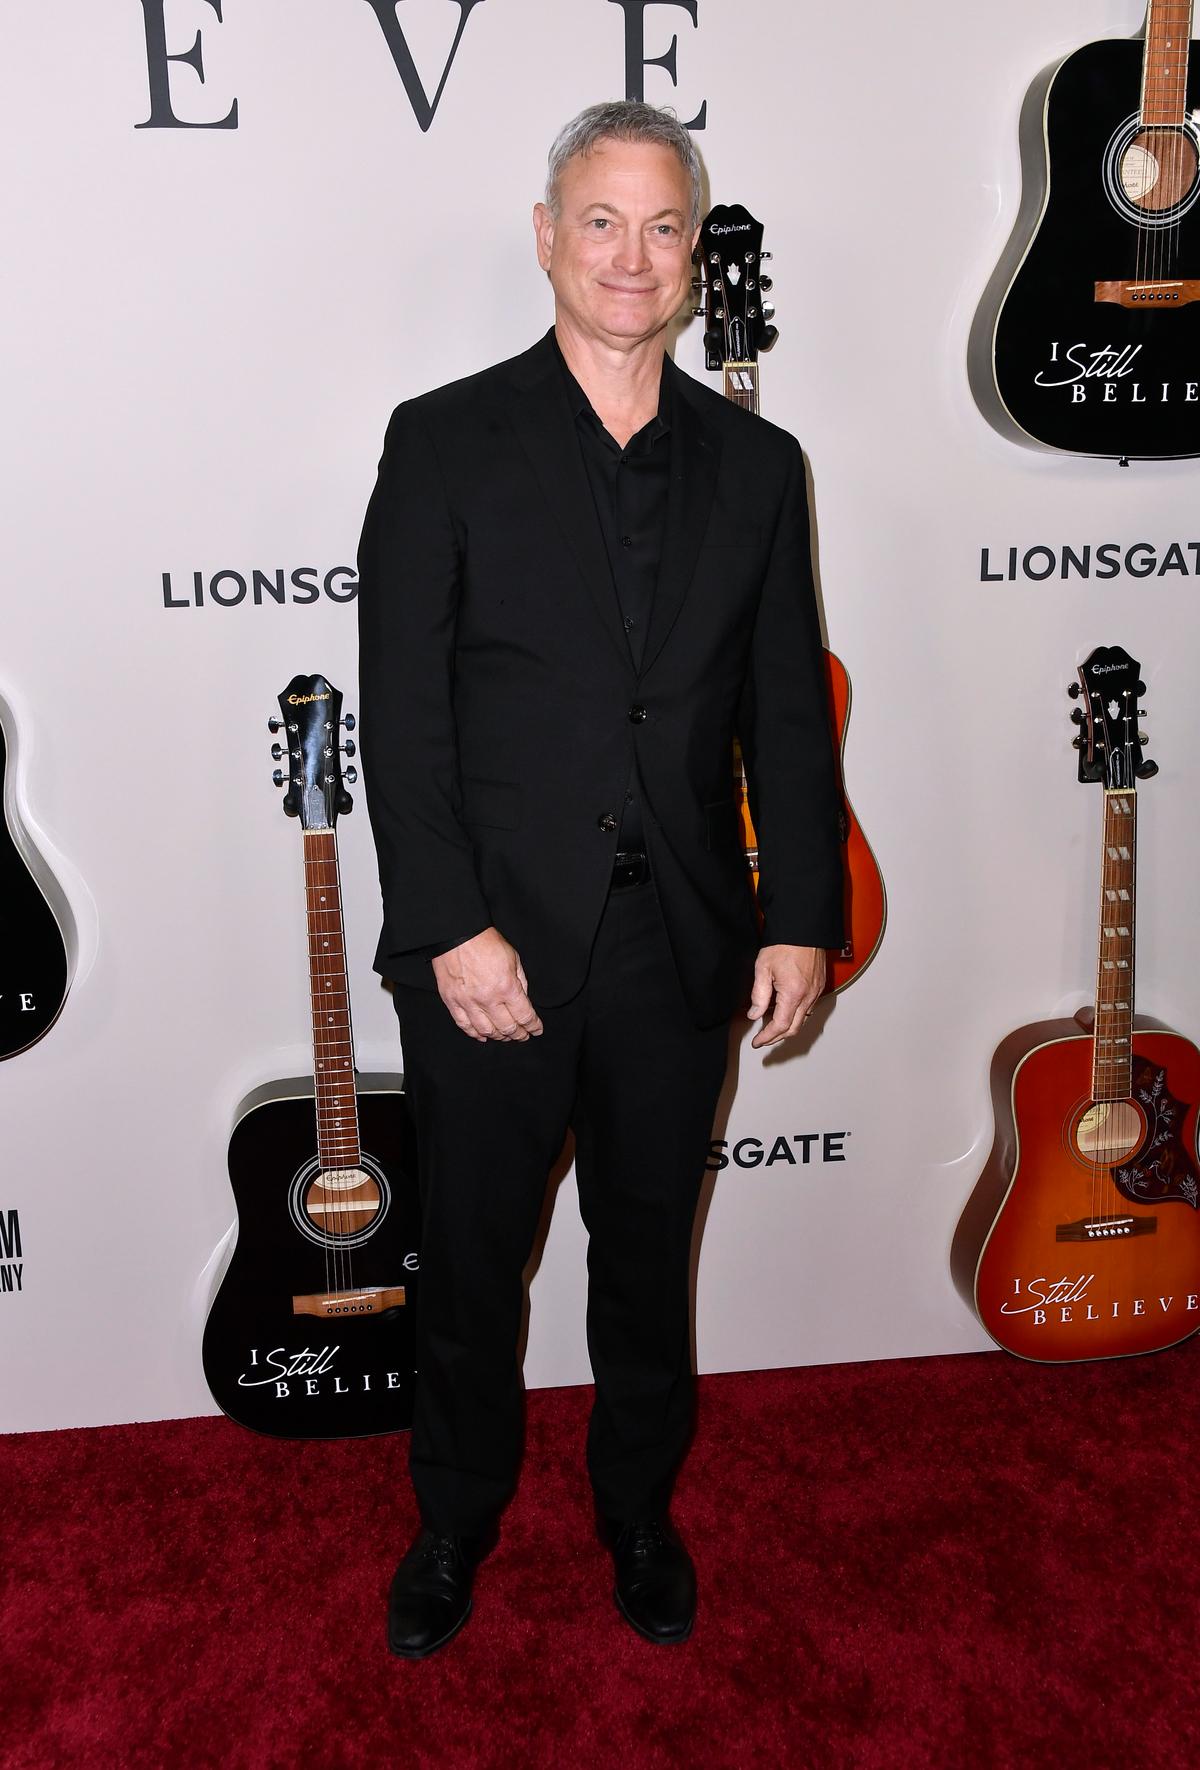 Gary Sinise attends the premiere of Lionsgate's "I Still Believe" at ArcLight Hollywood in Hollywood, Calif., on March 7, 2020. (Frazer Harrison/Getty Images)